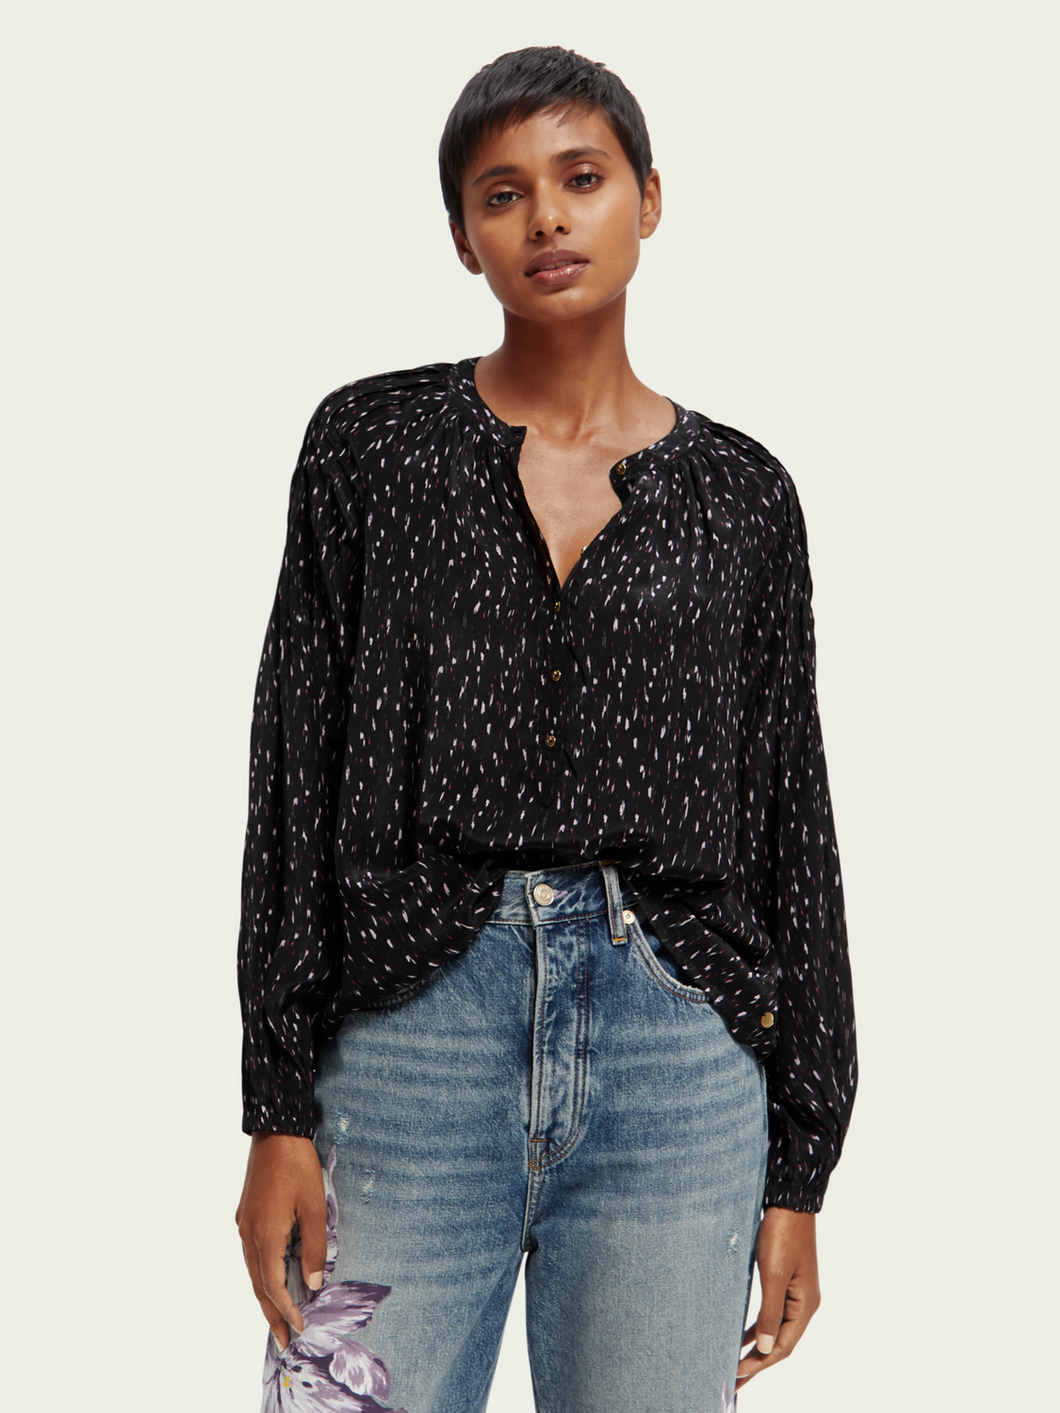 Scotch & Soda Popover Top w/Pintuck Sleeves in Ikat Print - FINAL SALE